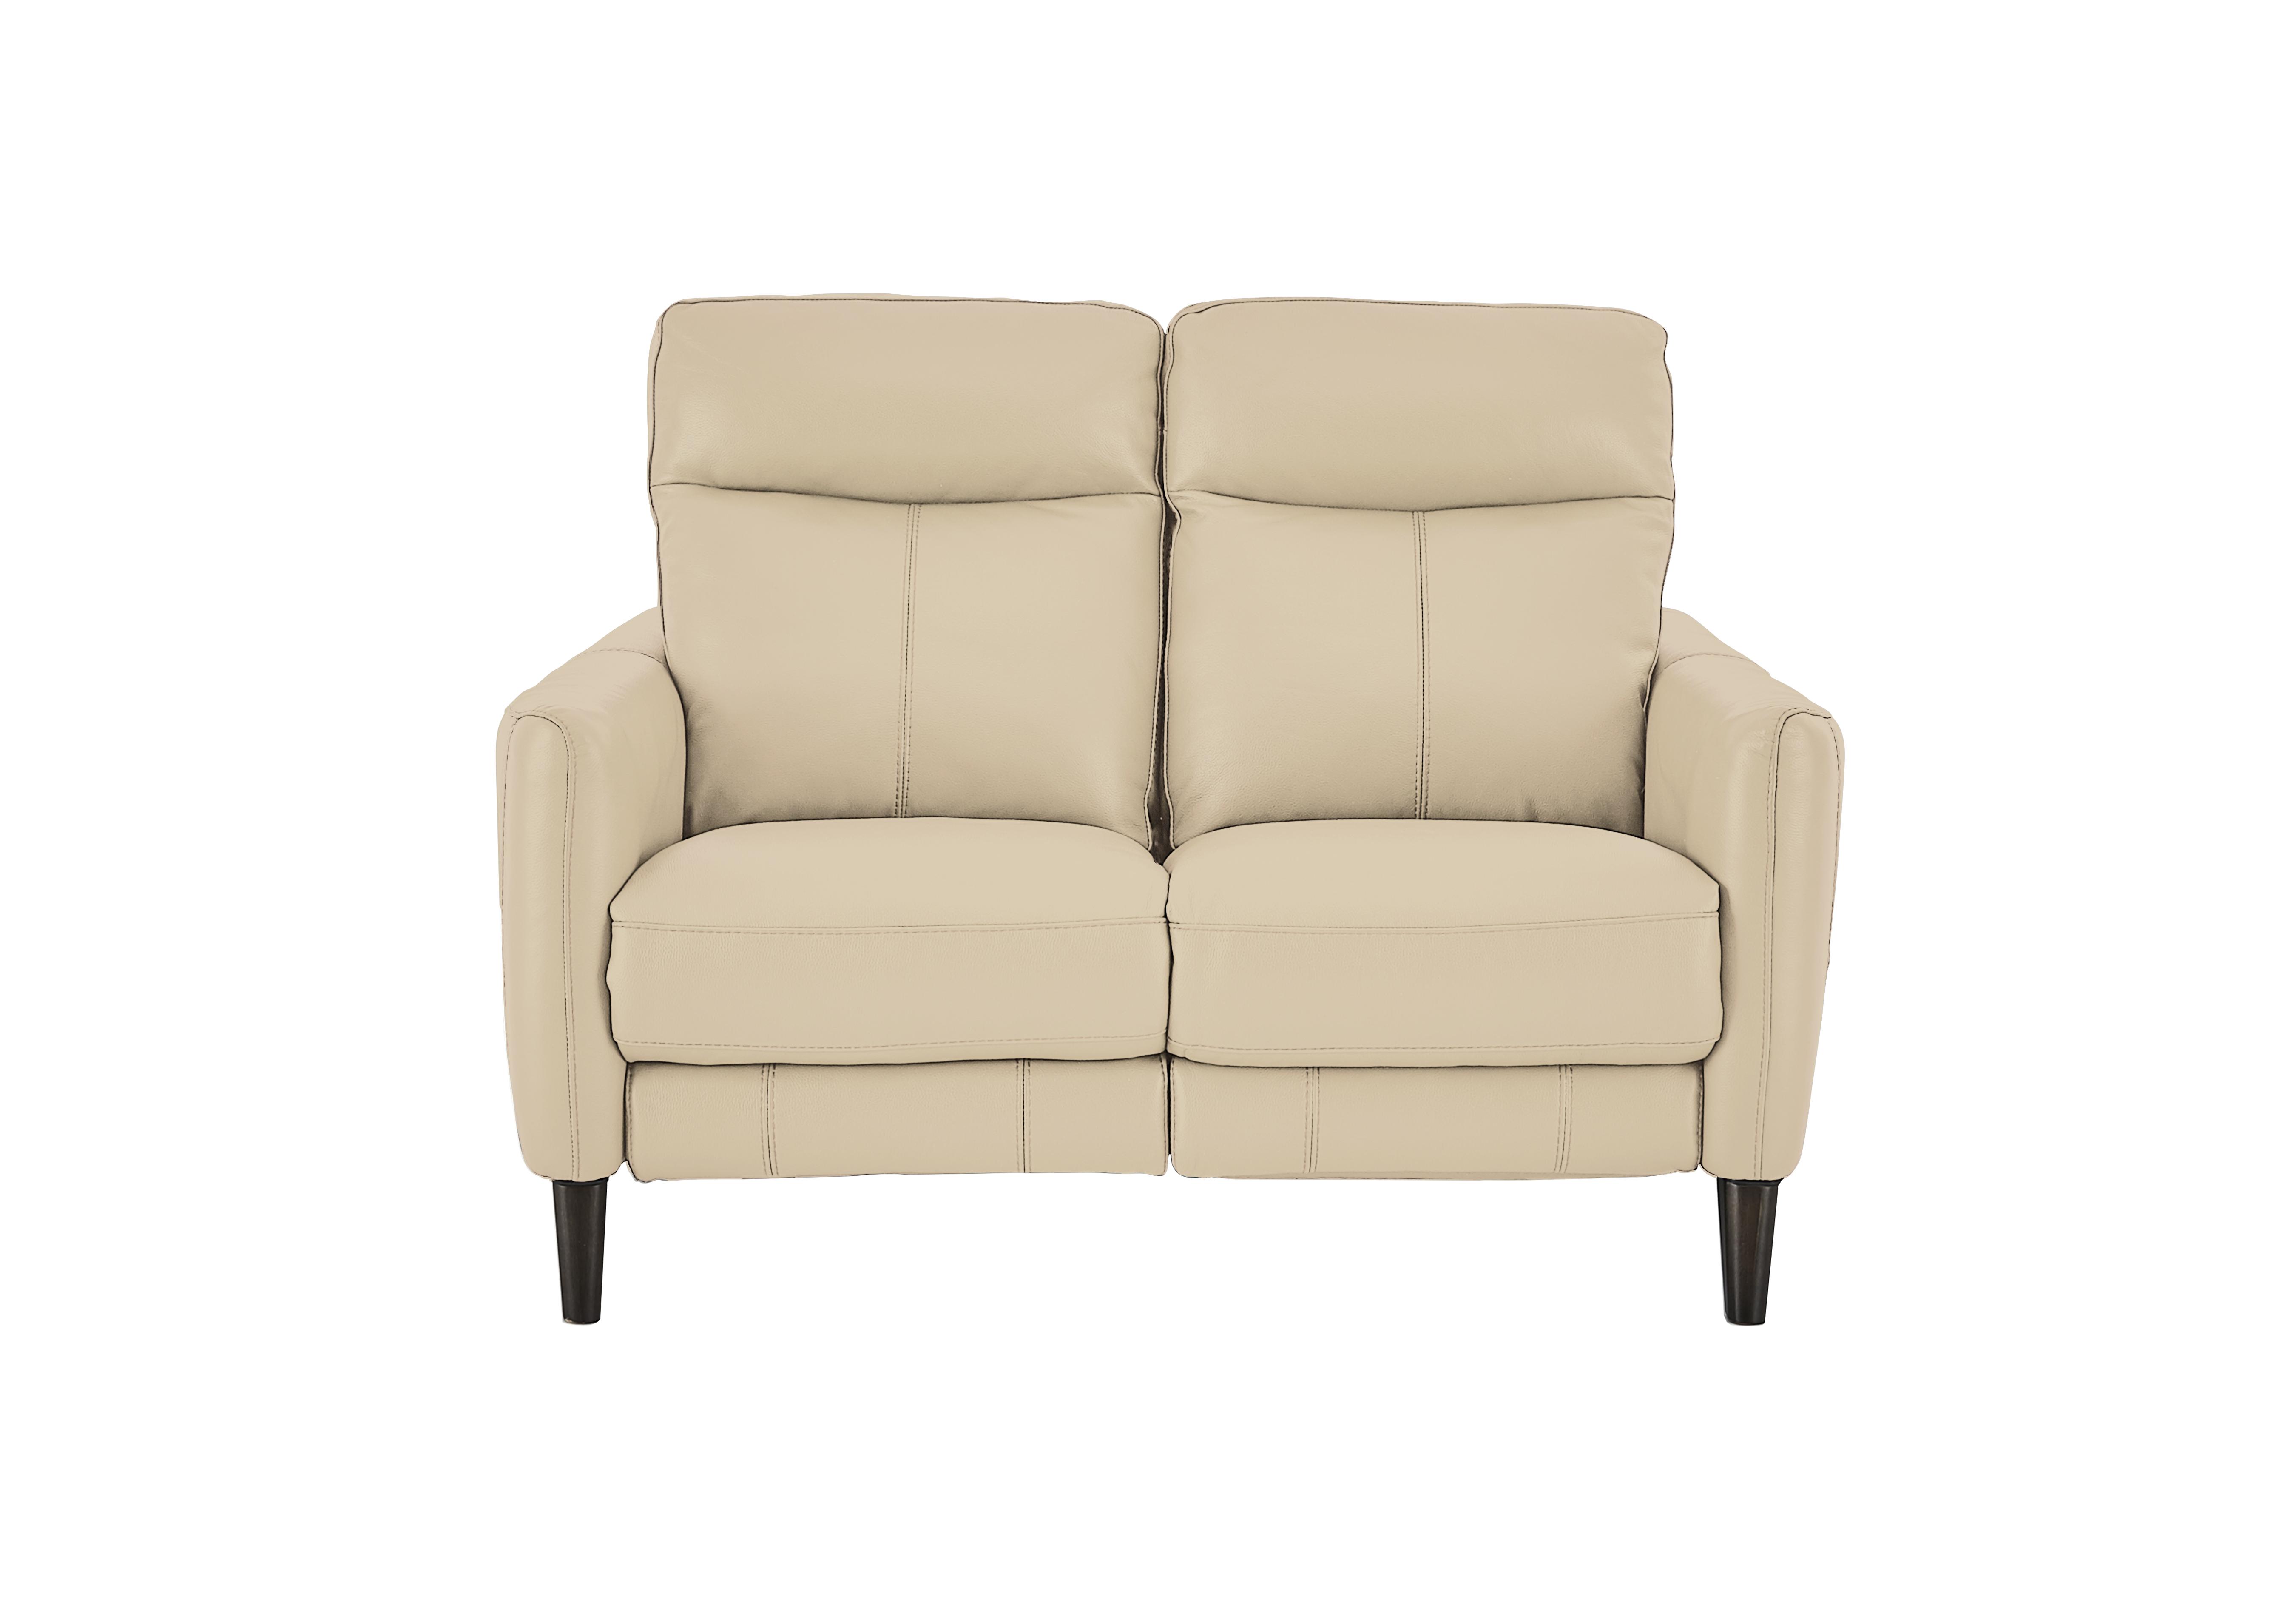 Compact Collection Petit 2 Seater Leather Sofa in Bv-862c Bisque on Furniture Village